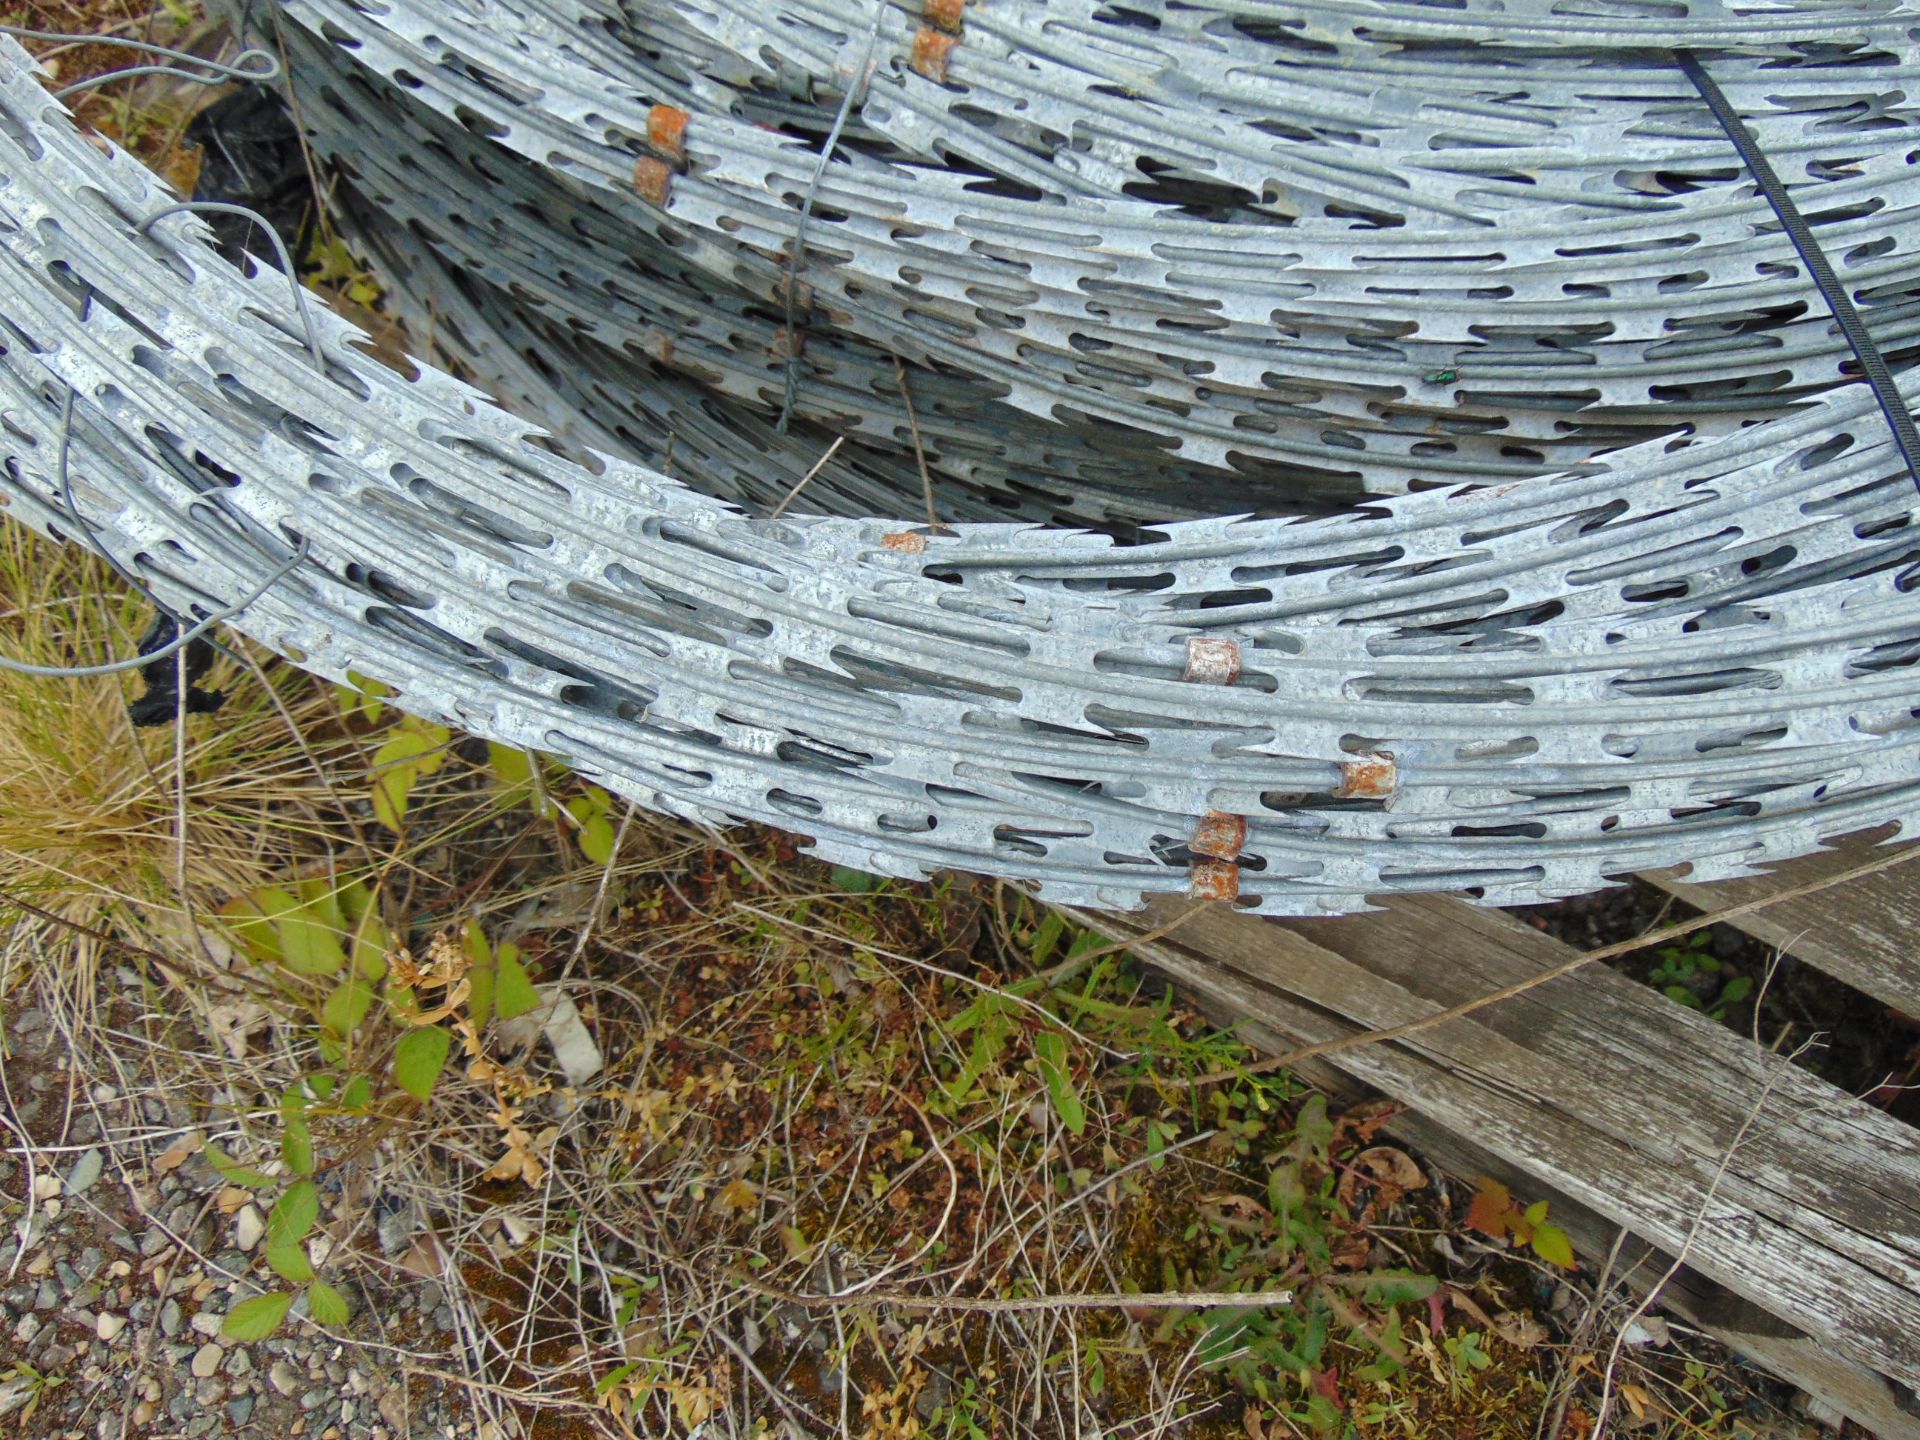 4 x Large Pallets of MoD Galvanised Razer Wire in Expanding Coils Quantity as shown - Image 6 of 6